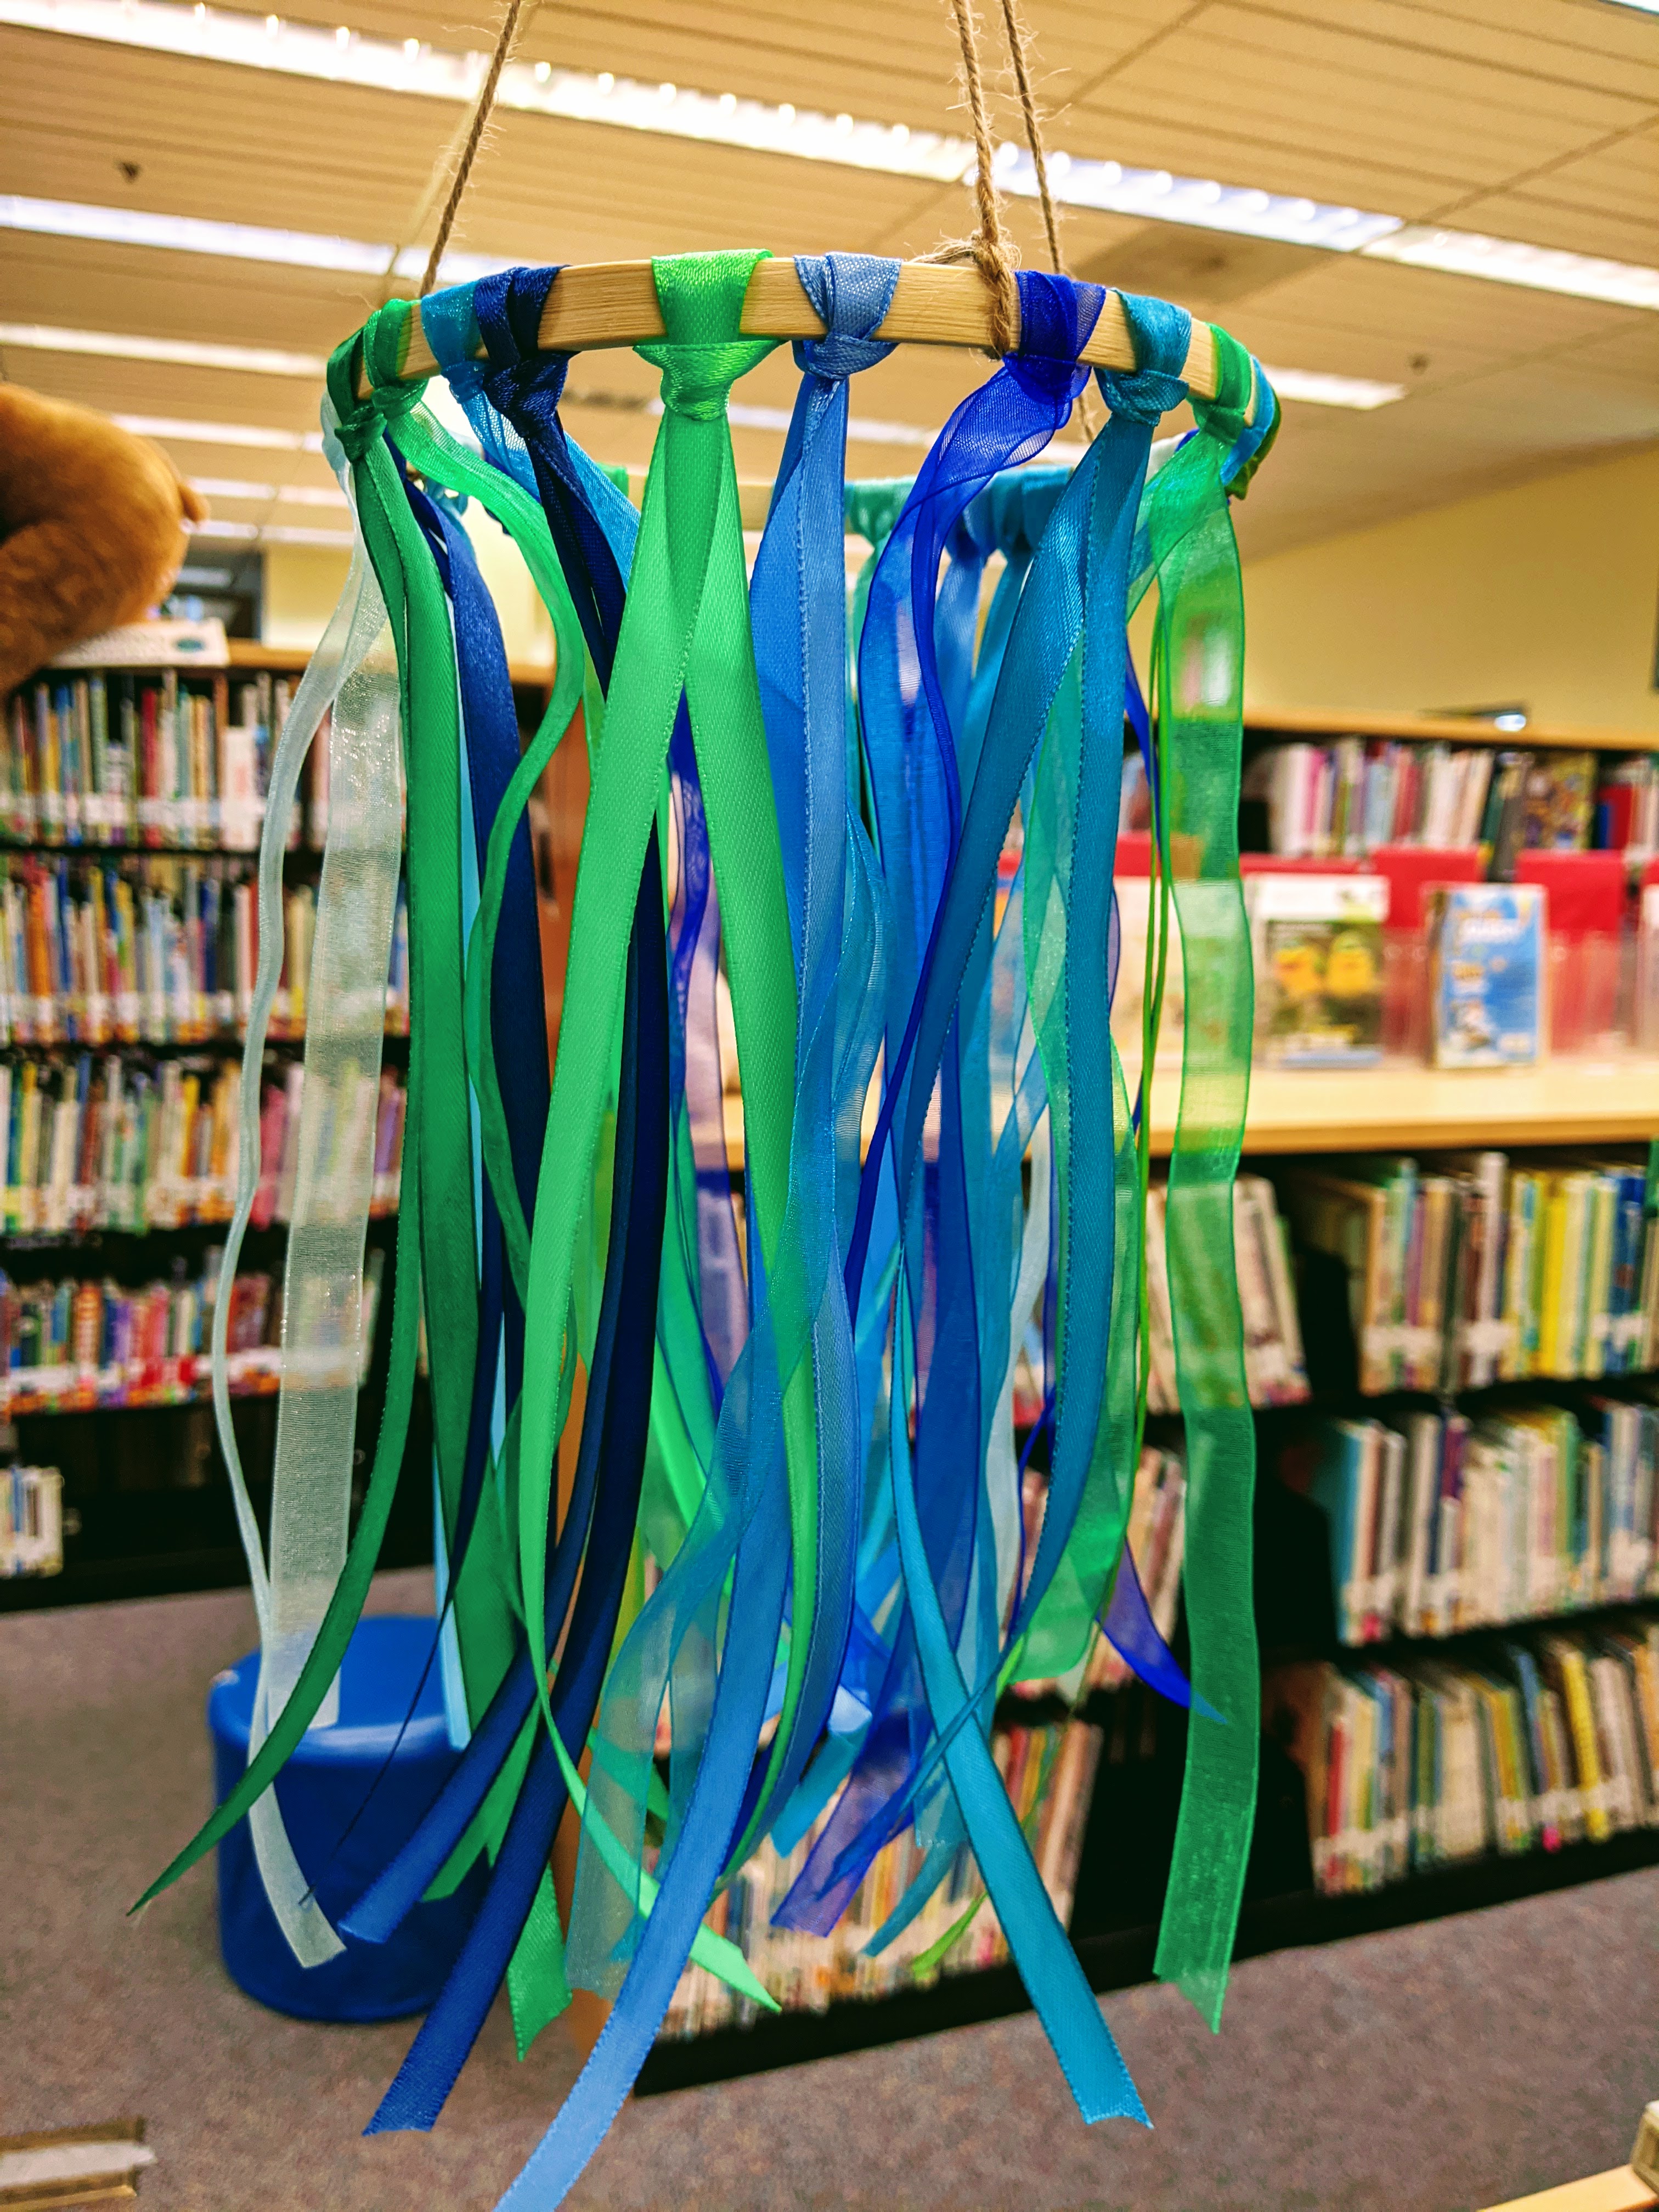 Mobile made of ribbon in various shades of blue and green